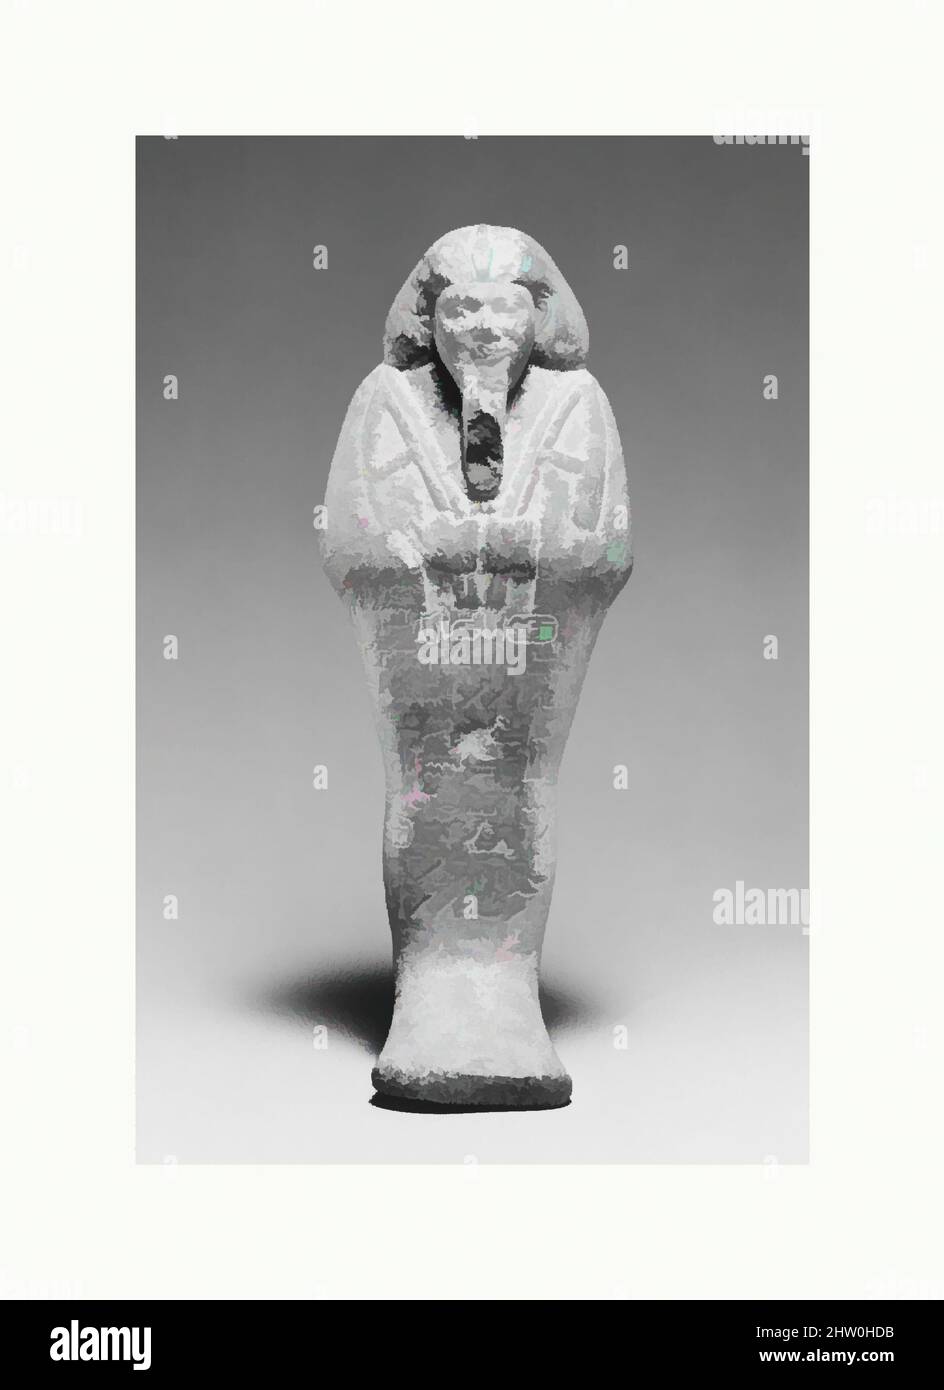 Art inspired by Shabti of Taharqo, Late Period, Kushite, Dynasty 25, 690–664 B.C., From Egypt and Sudan; Probably from Nubia, Nuri, Granite a Nubian variety, H. 20.3 × W. 7.6 × D. 5.4 cm (8 × 3 × 2 1/8 in.), The Kushite kings who ruled Egypt were buried in their Nubian homeland; this, Classic works modernized by Artotop with a splash of modernity. Shapes, color and value, eye-catching visual impact on art. Emotions through freedom of artworks in a contemporary way. A timeless message pursuing a wildly creative new direction. Artists turning to the digital medium and creating the Artotop NFT Stock Photo